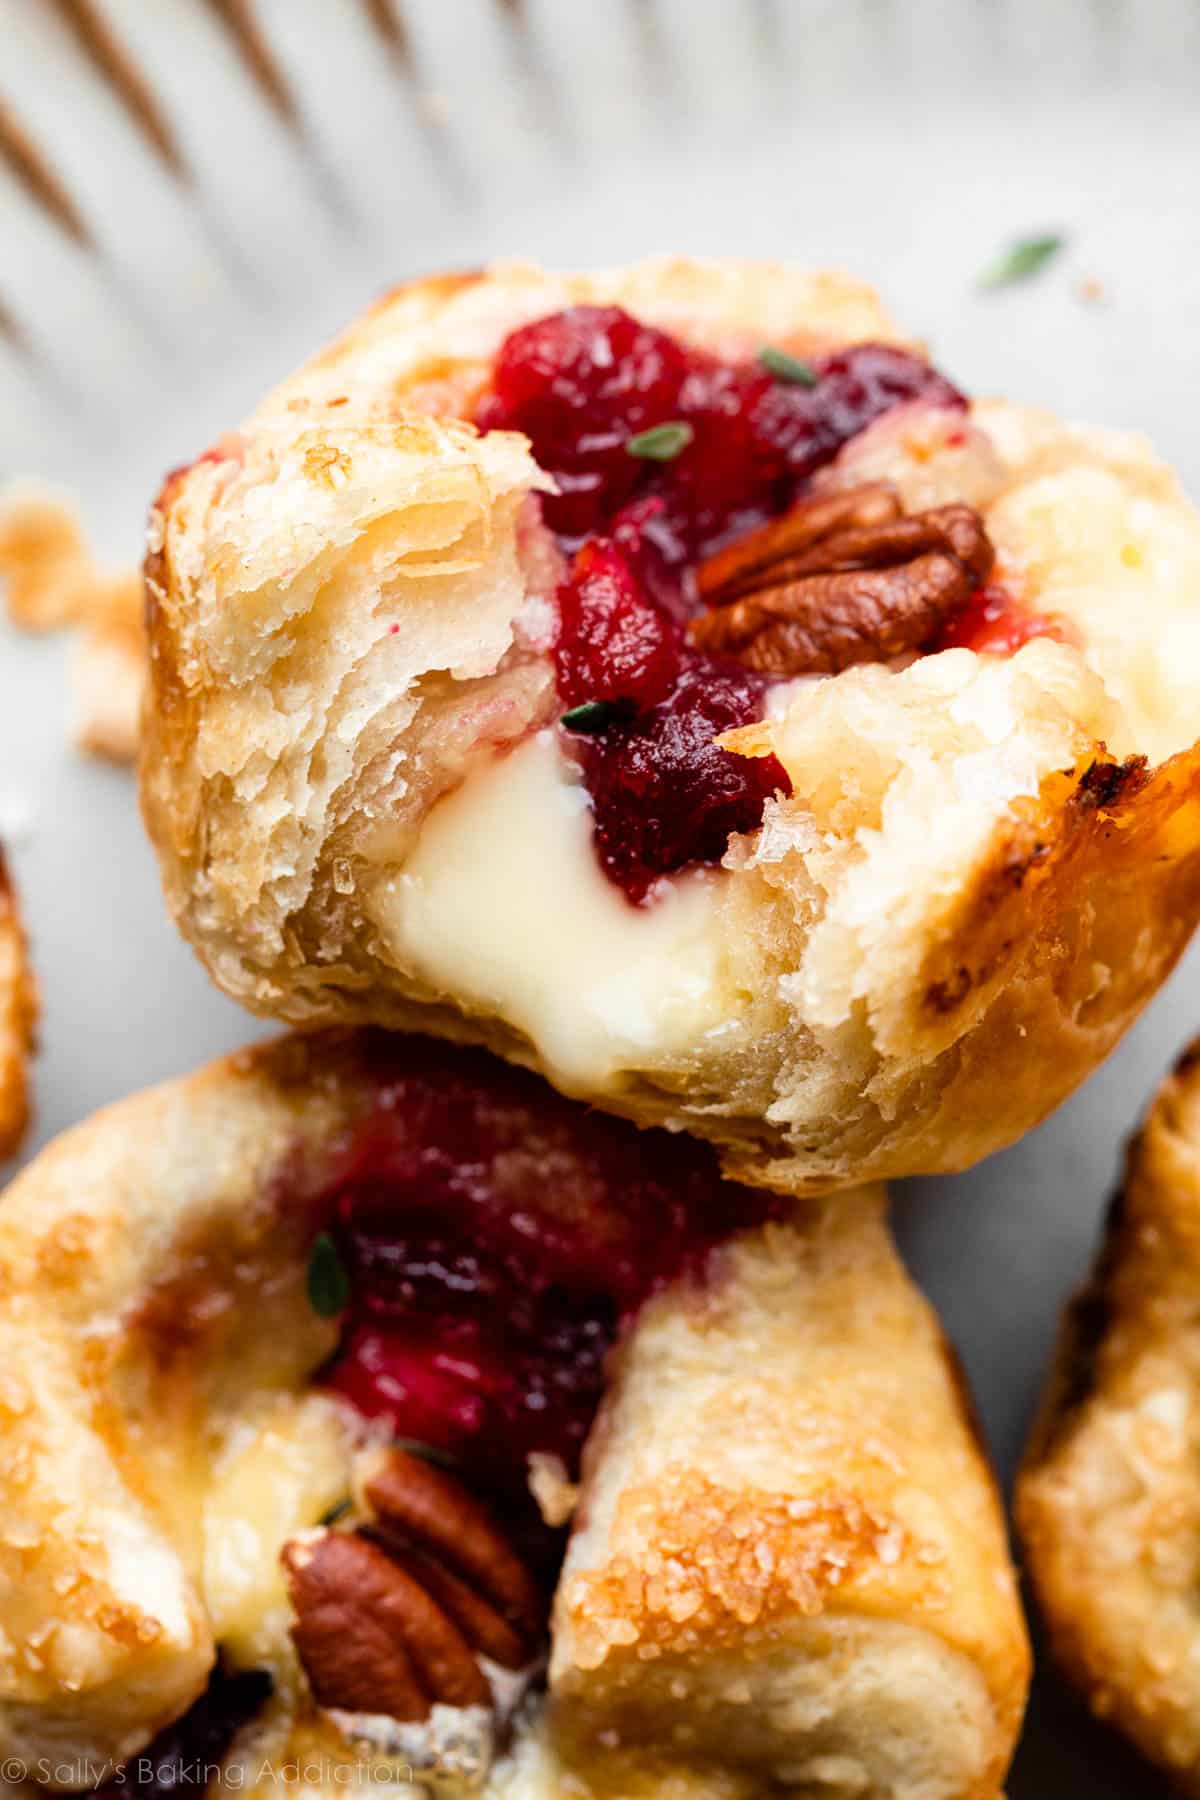 cranberry sauce and brie in a flaky puff pastry tart shown with a bite taken out.